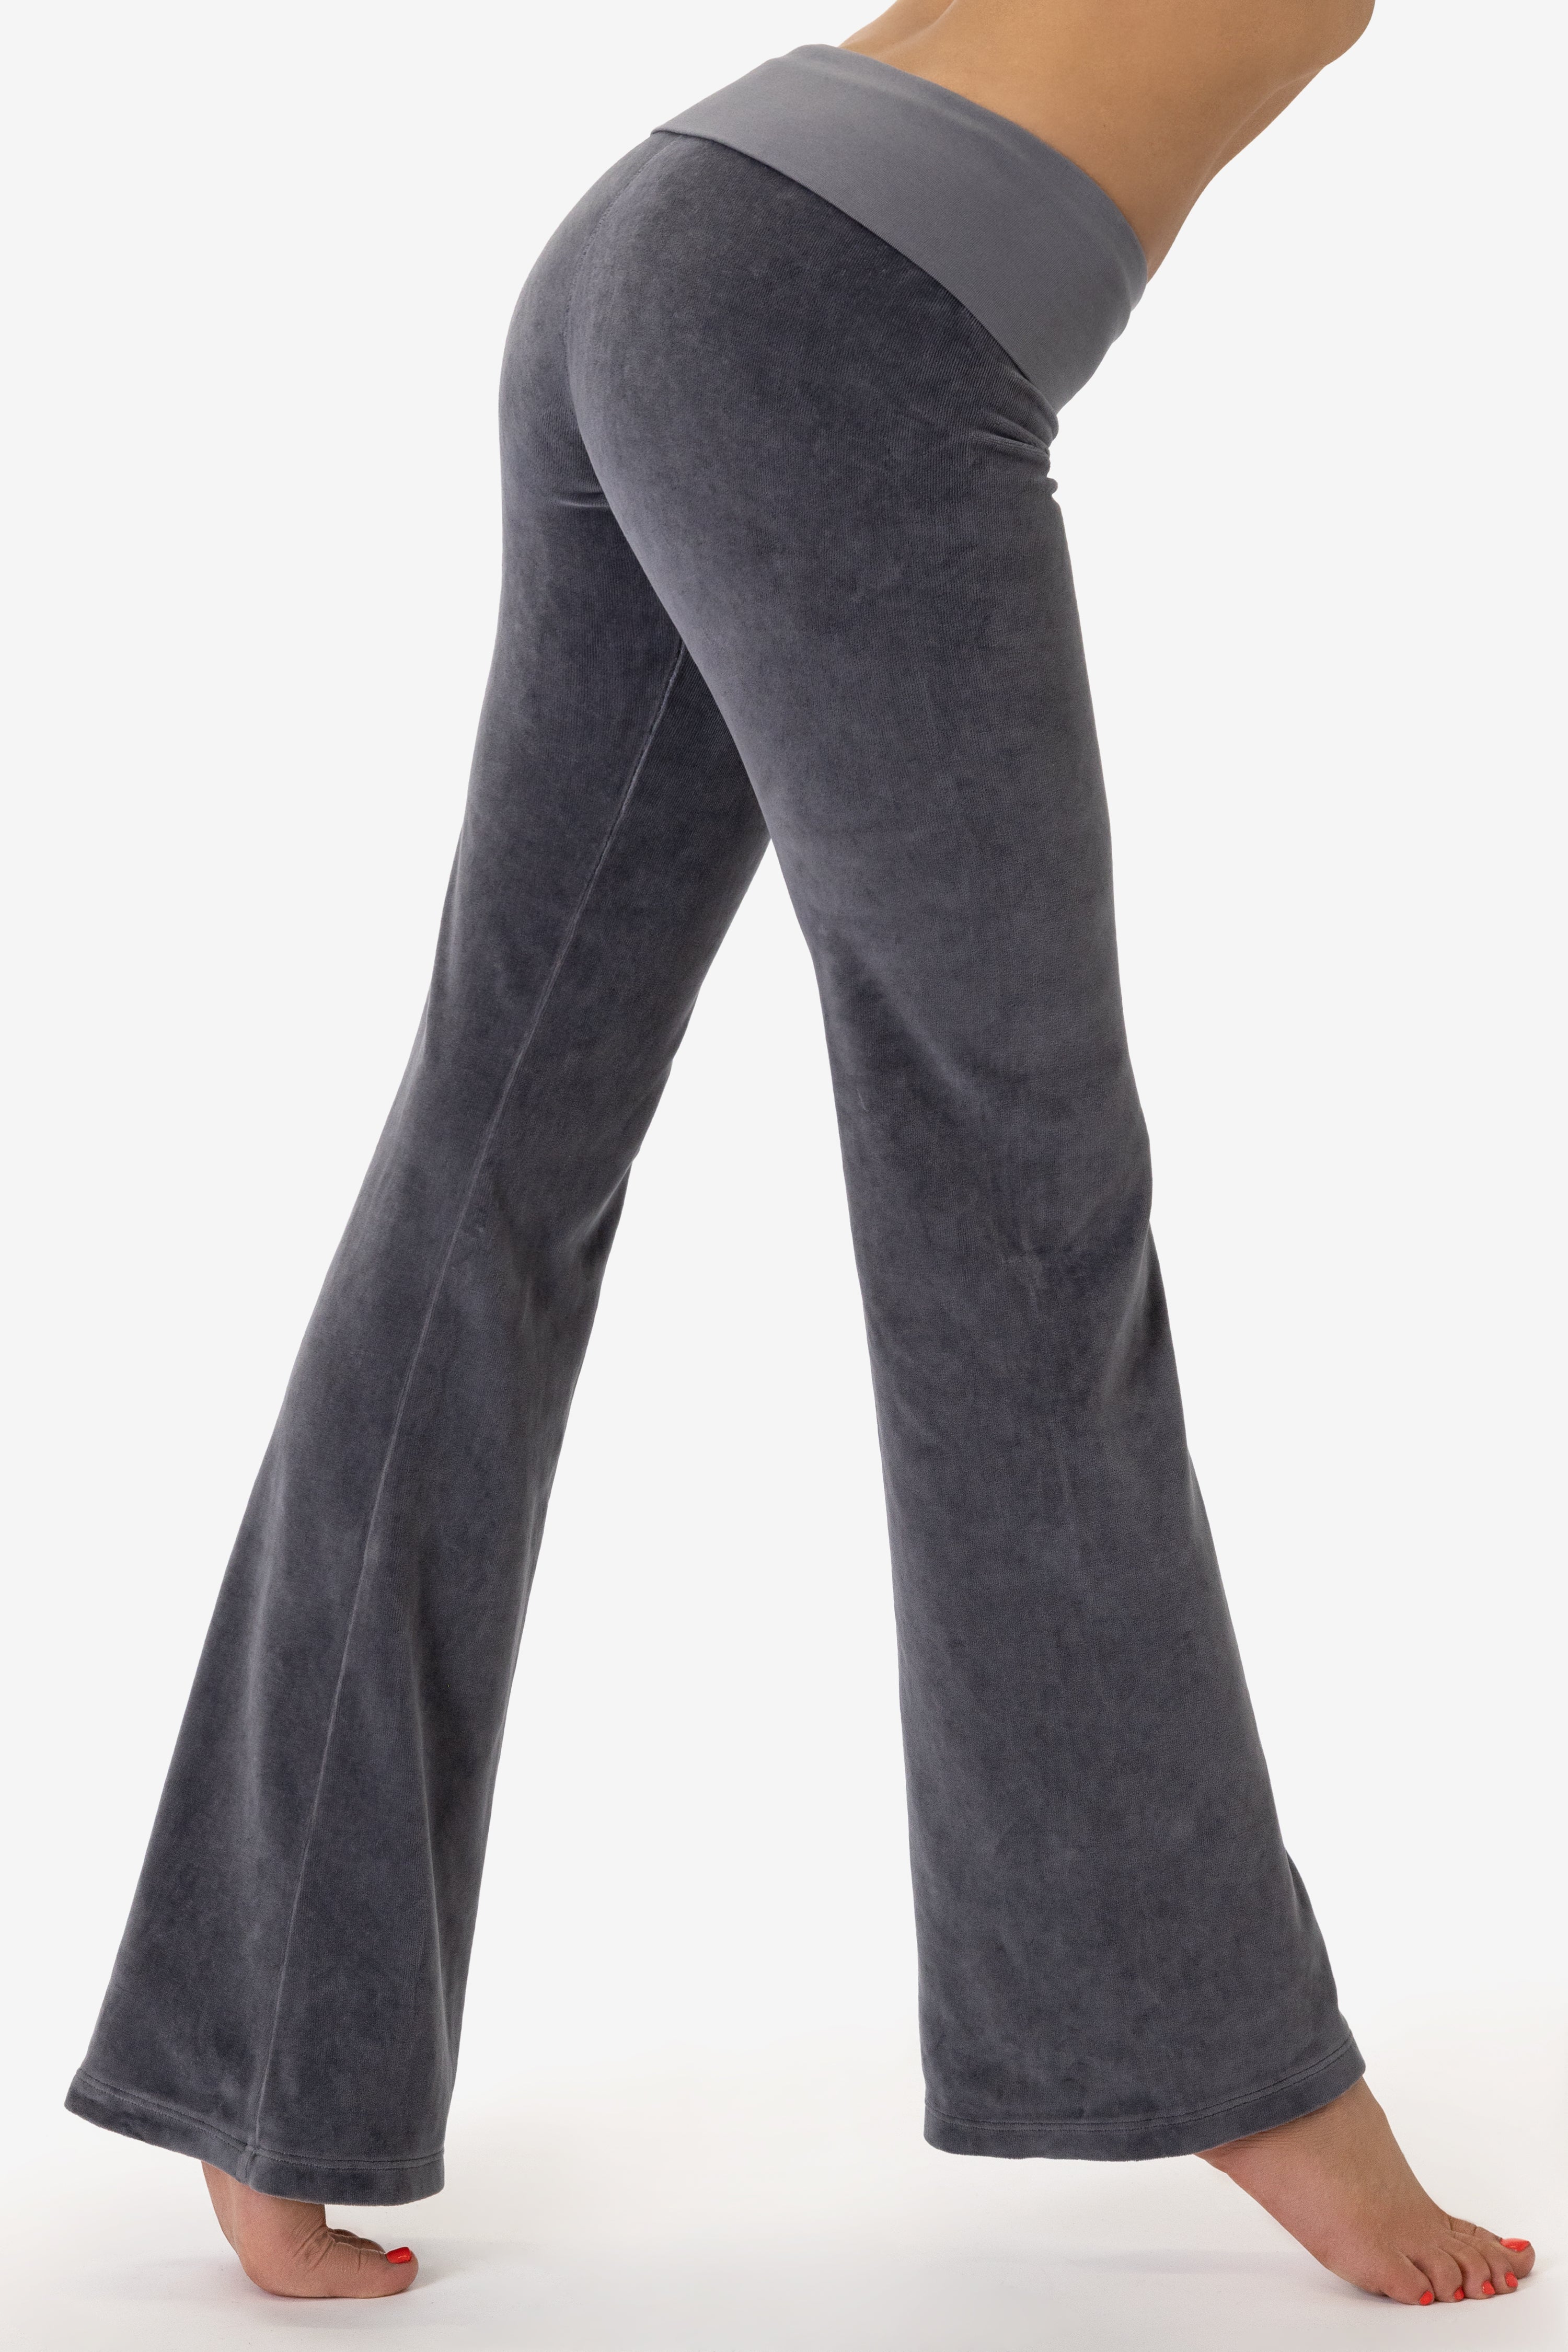 T-Party Fold Over Mineral Washed Yoga Pants